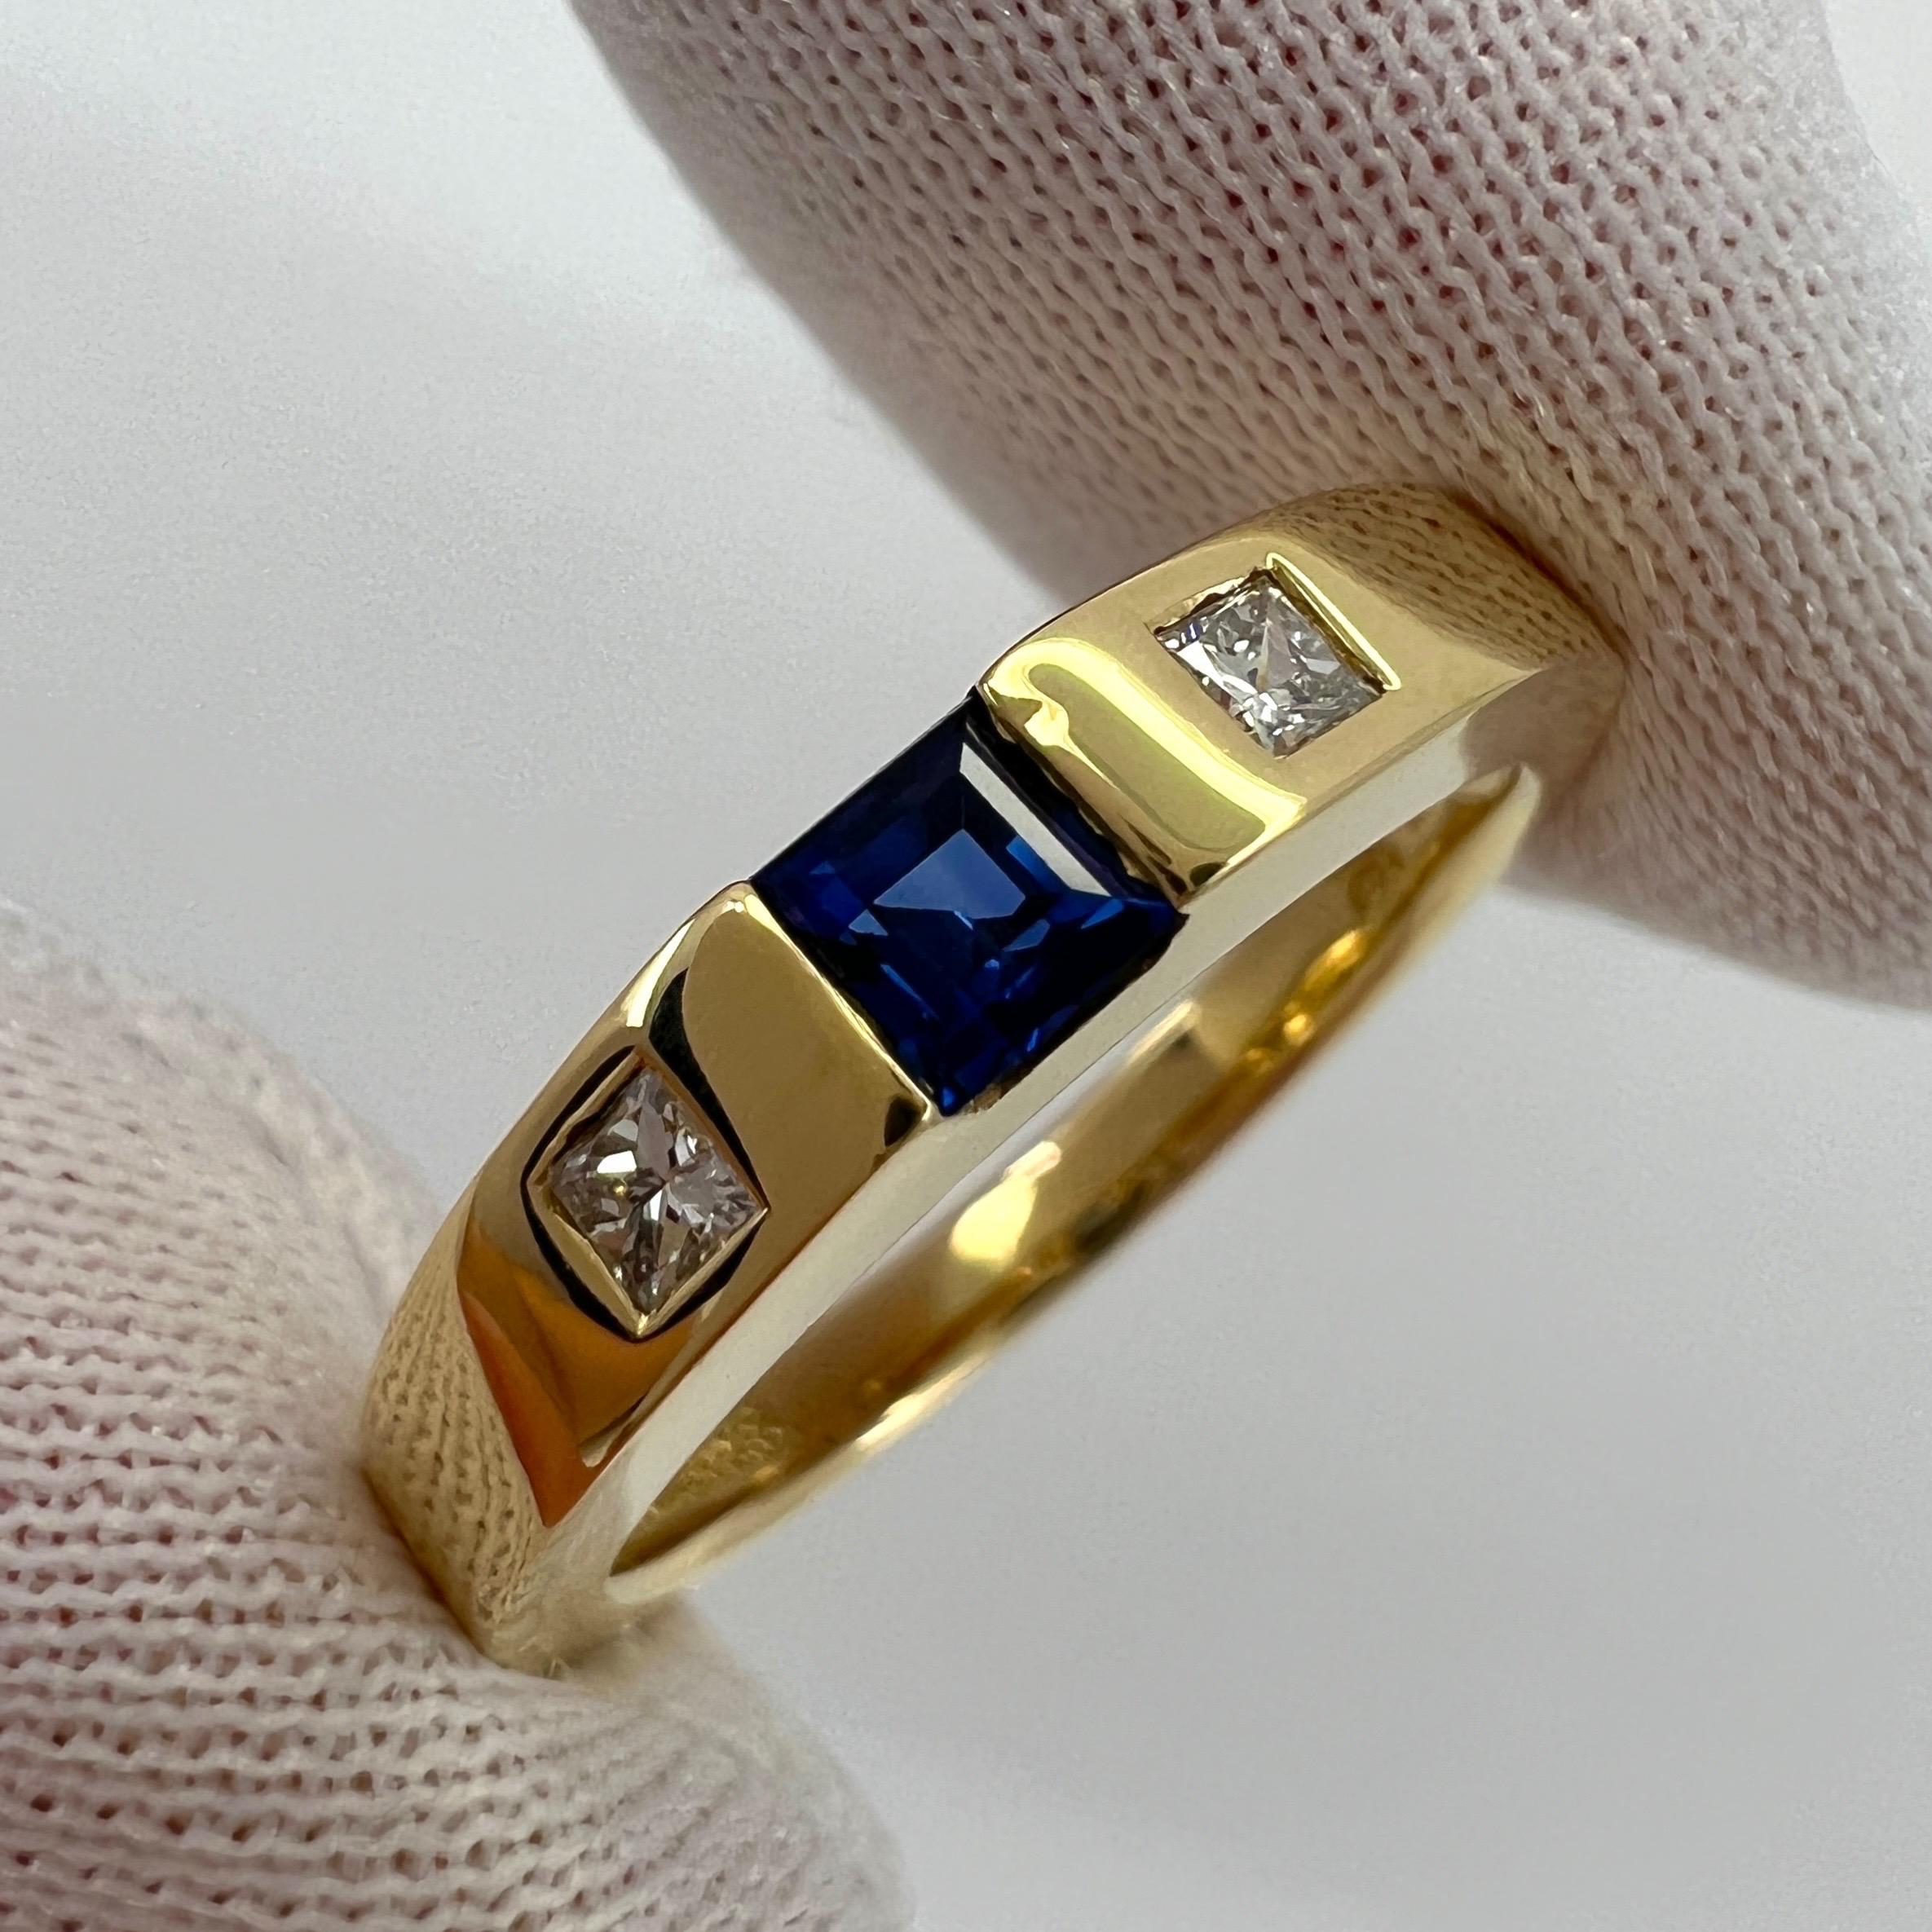 Vintage Tiffany & Co Blue Sapphire & Diamond 18k Yellow Gold Three Stone Band Ring.

Stunning yellow gold ring set with a fine princess cut deep blue sapphire (3.4mm) and 2 princess cut diamonds (2mm).

Fine jewellery houses like Tiffany only use